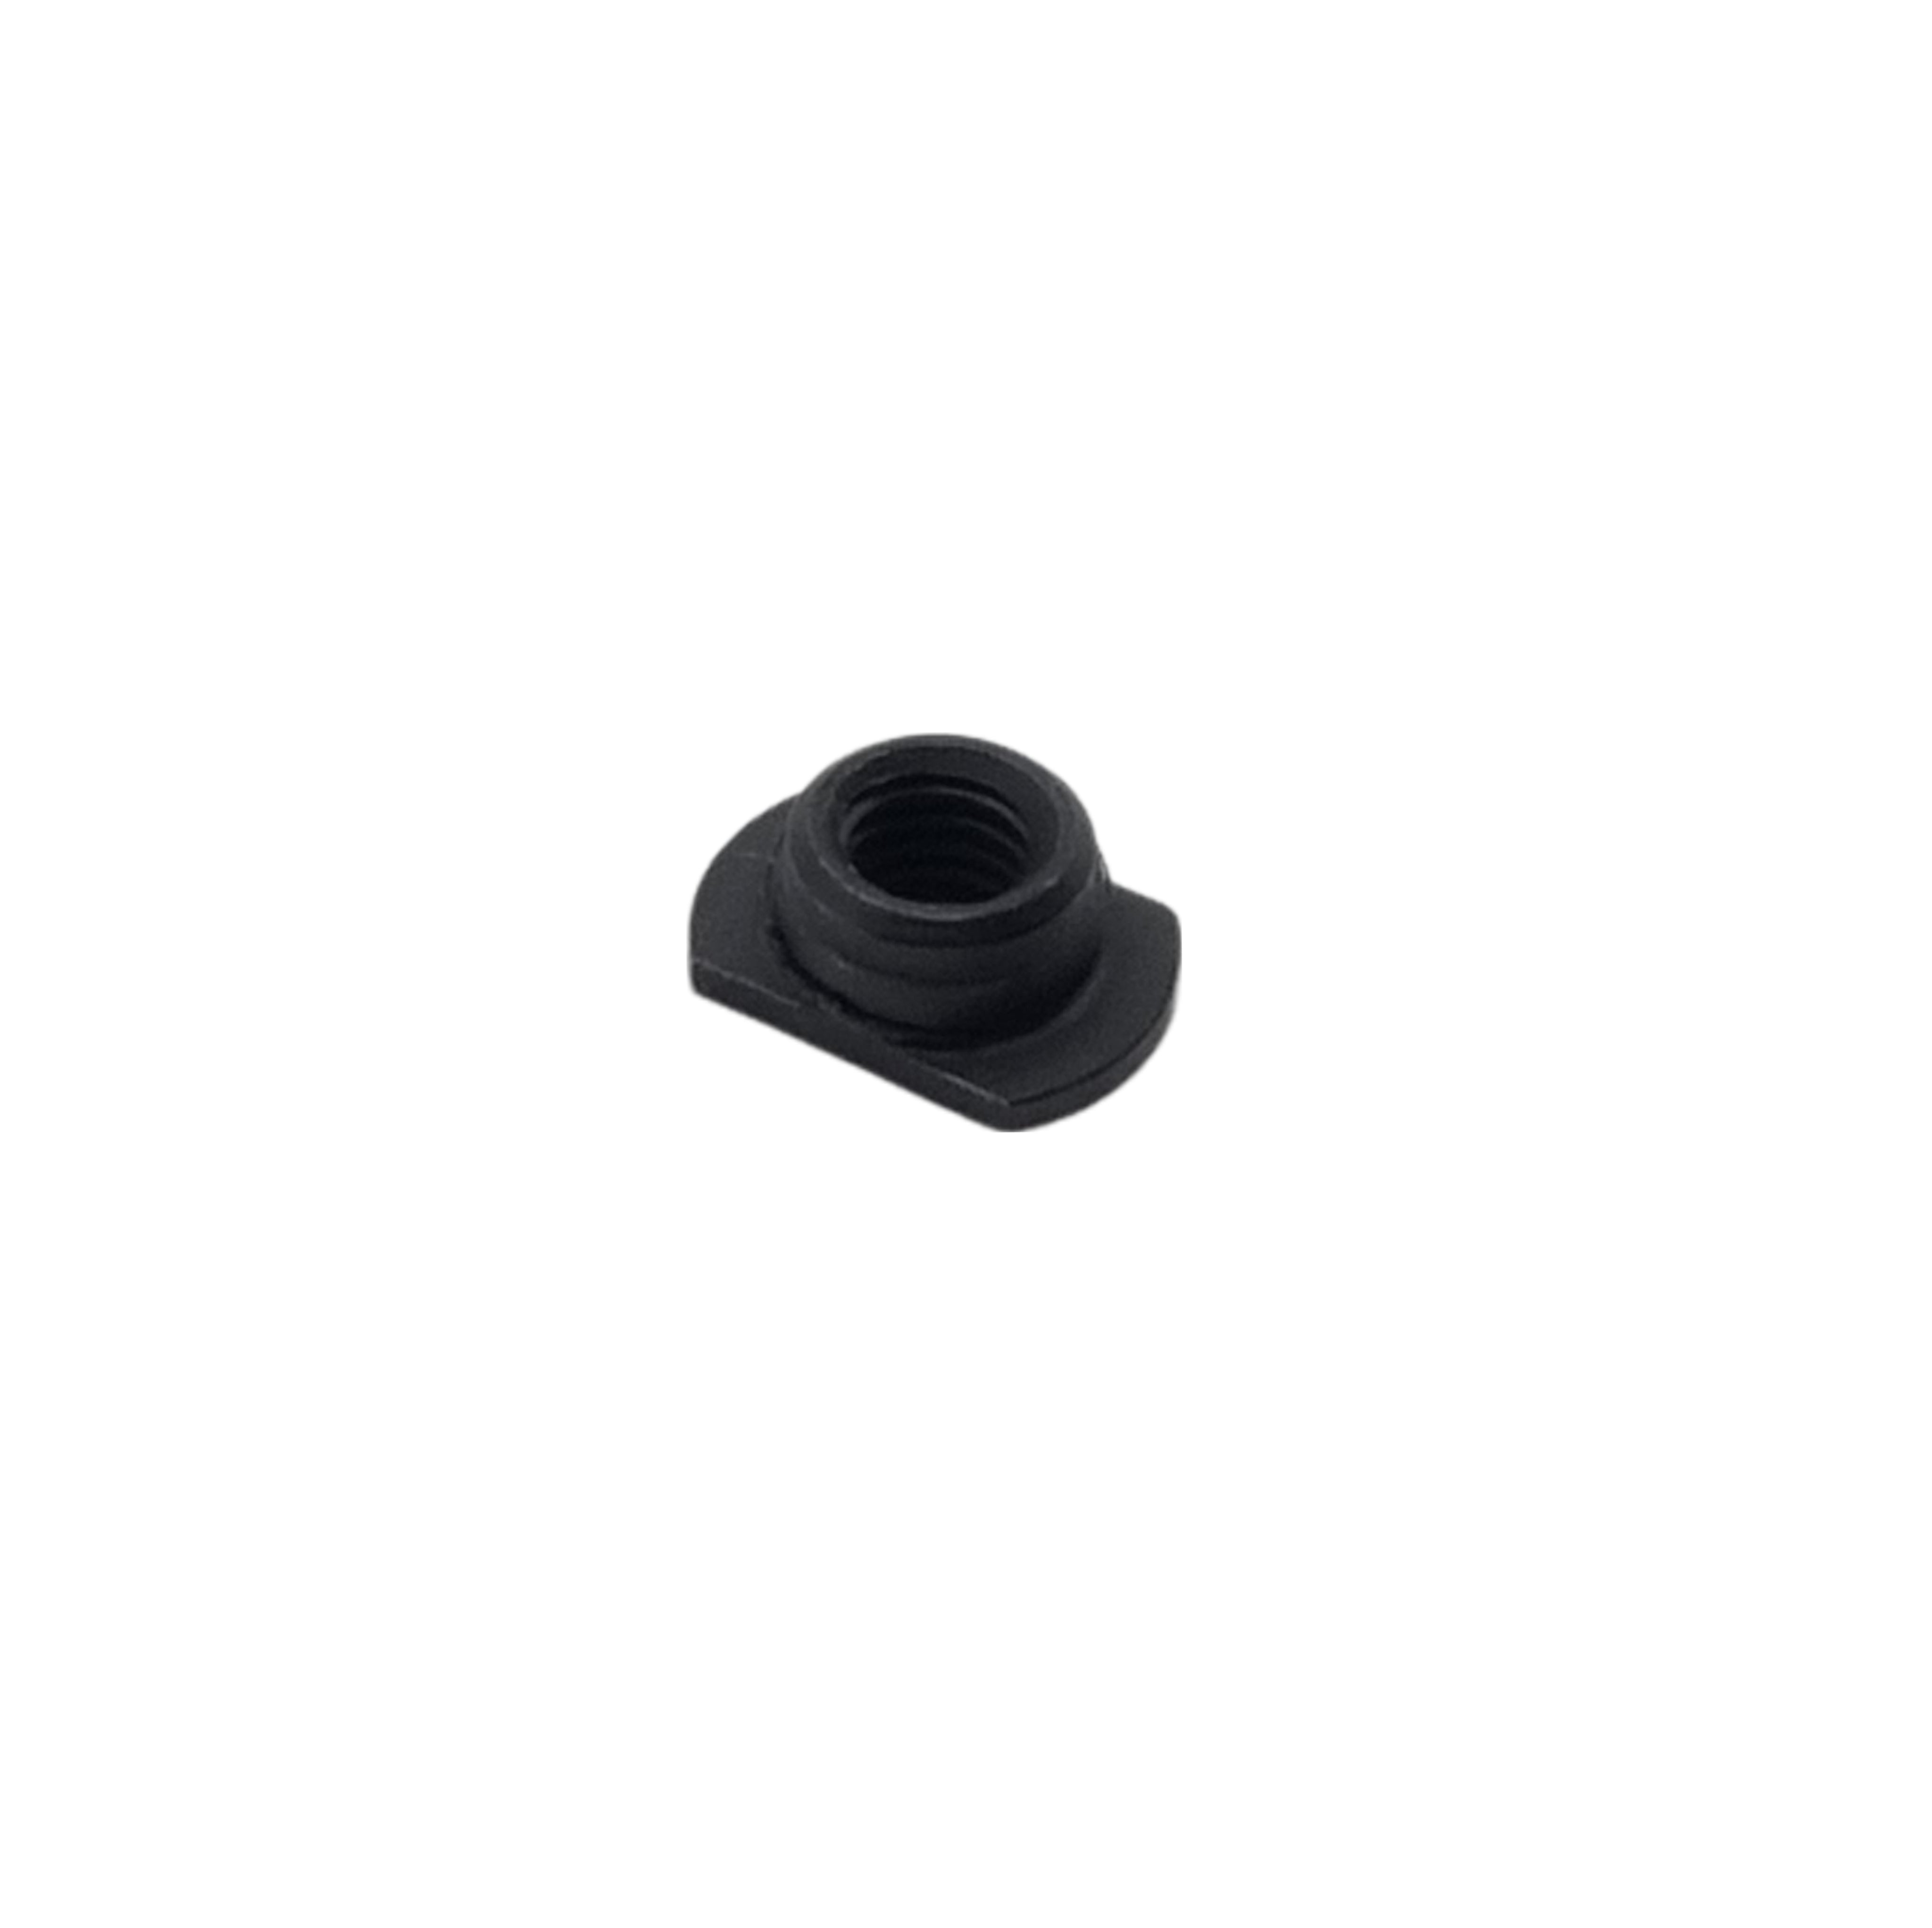 Action Army AAP01 Replacement Part 23 - Rear Sight Screw Base (Single)